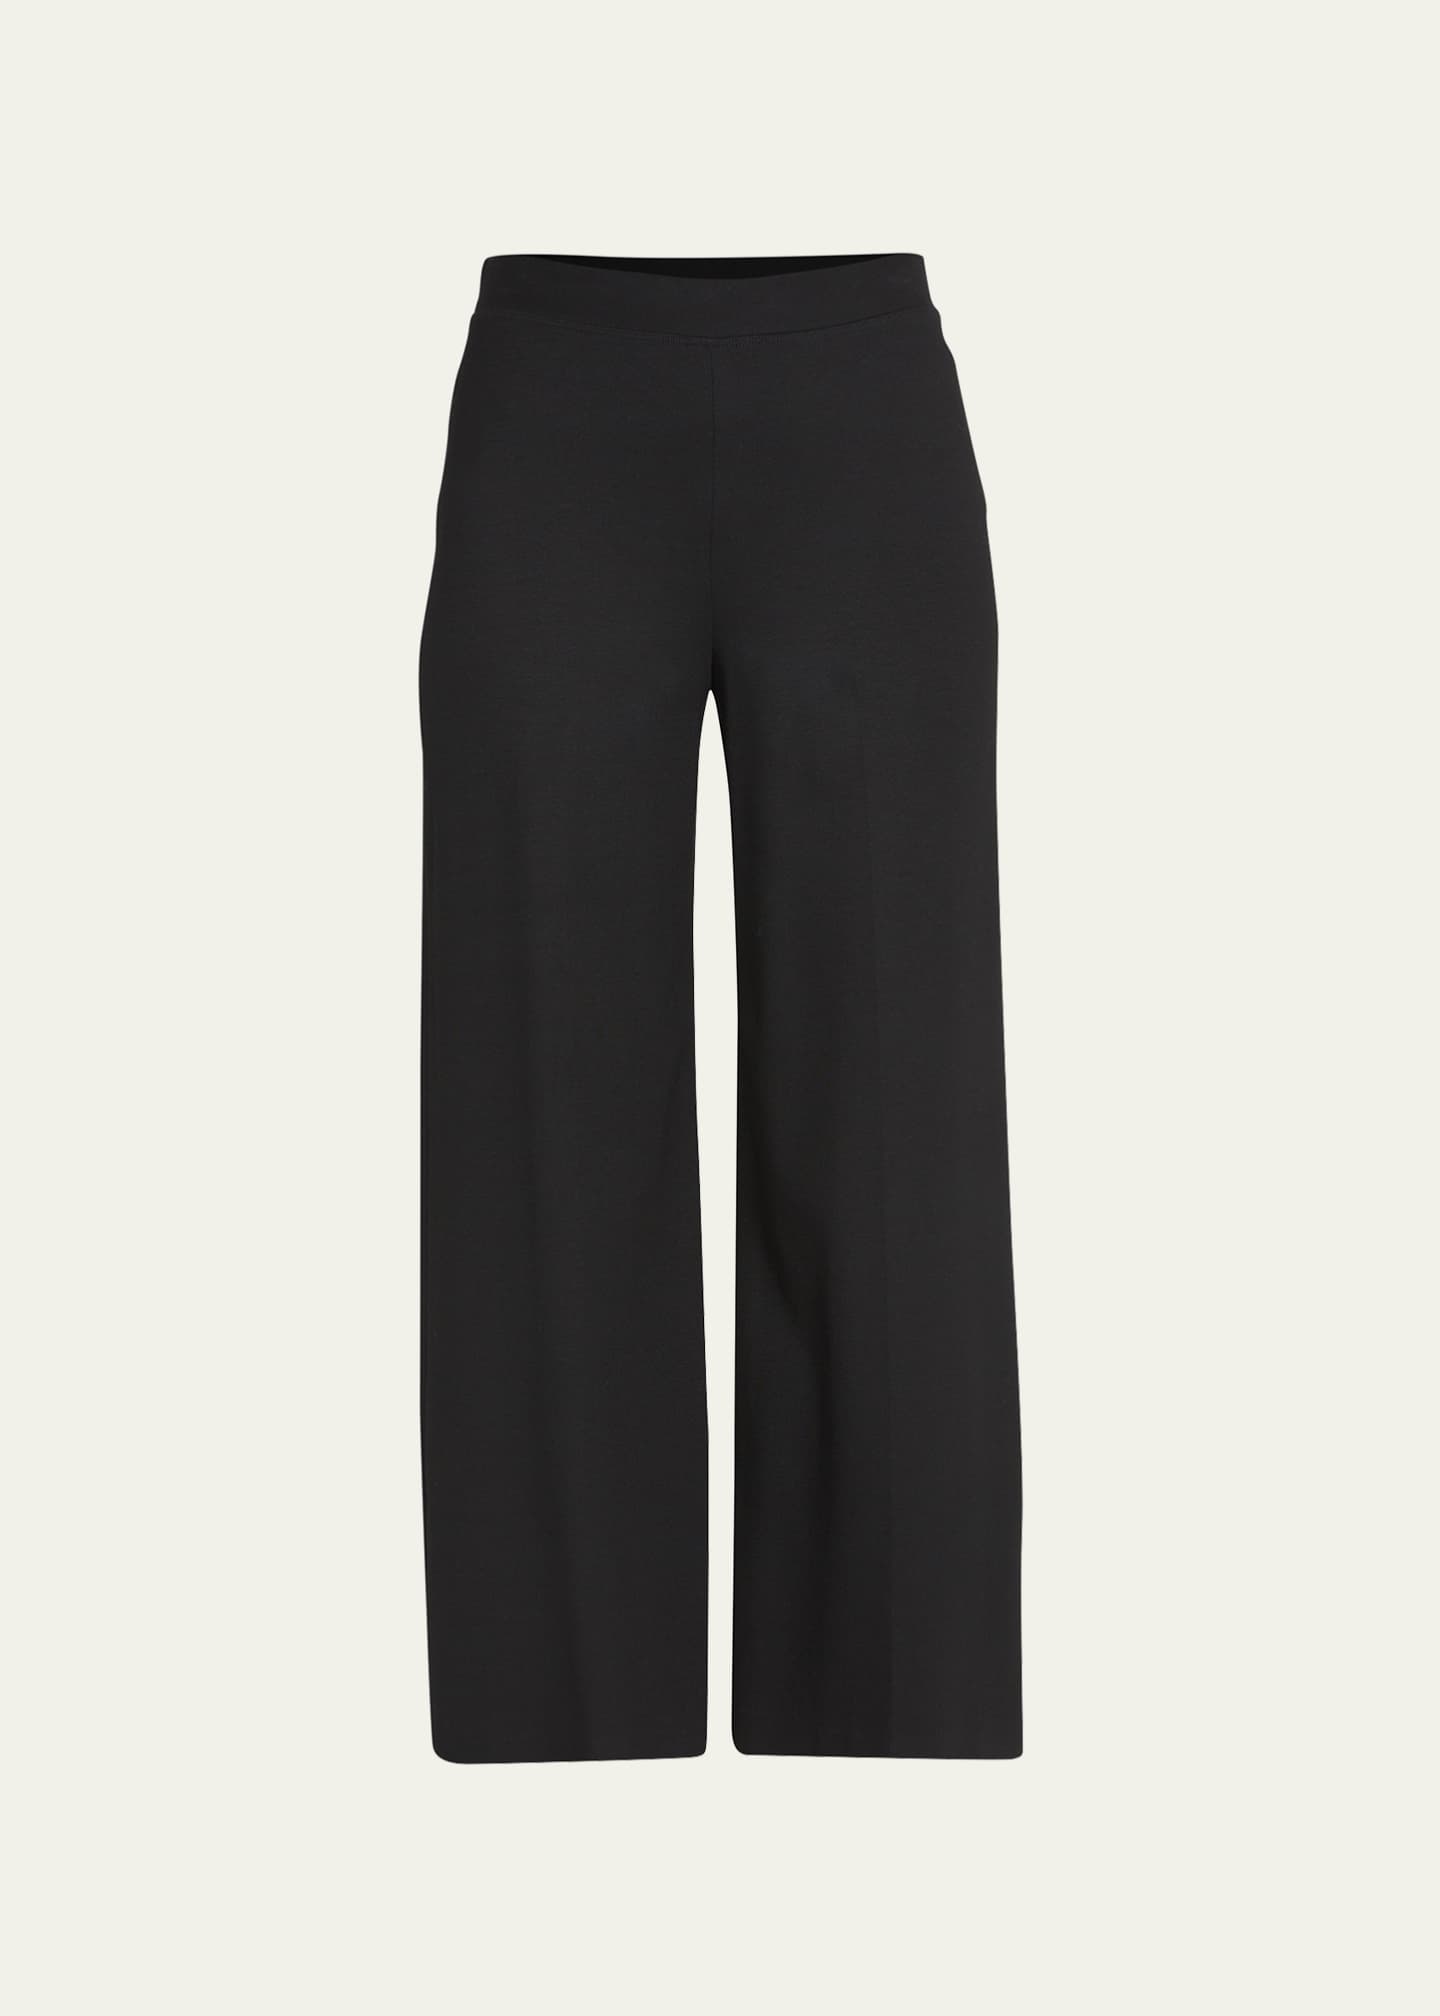 Rosetta Getty Cropped Flare Trousers Image 1 of 5